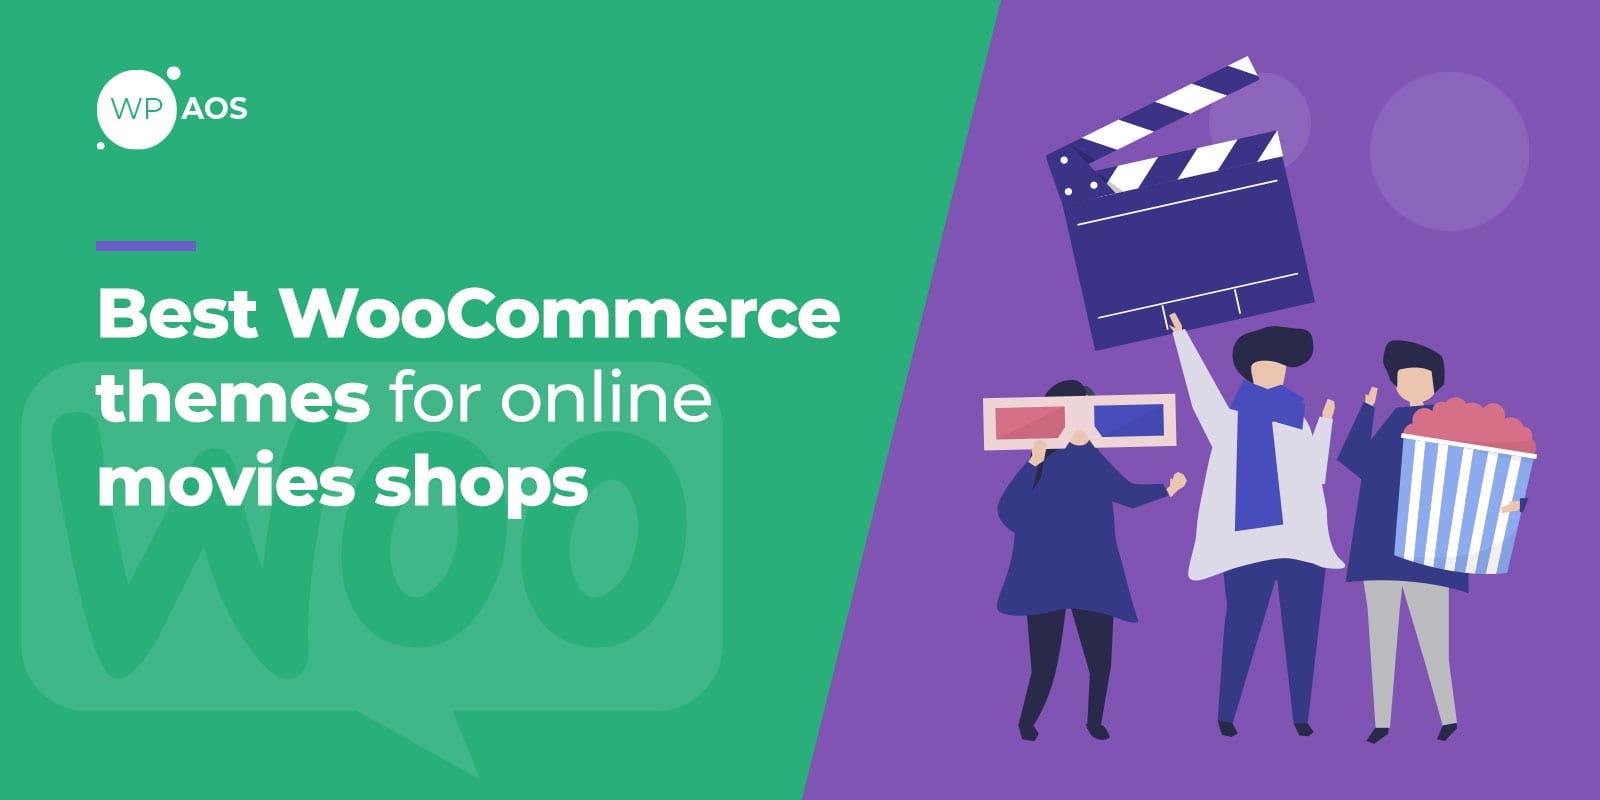 Best WooCommerce Themes for Online Movies Shops, wpaos